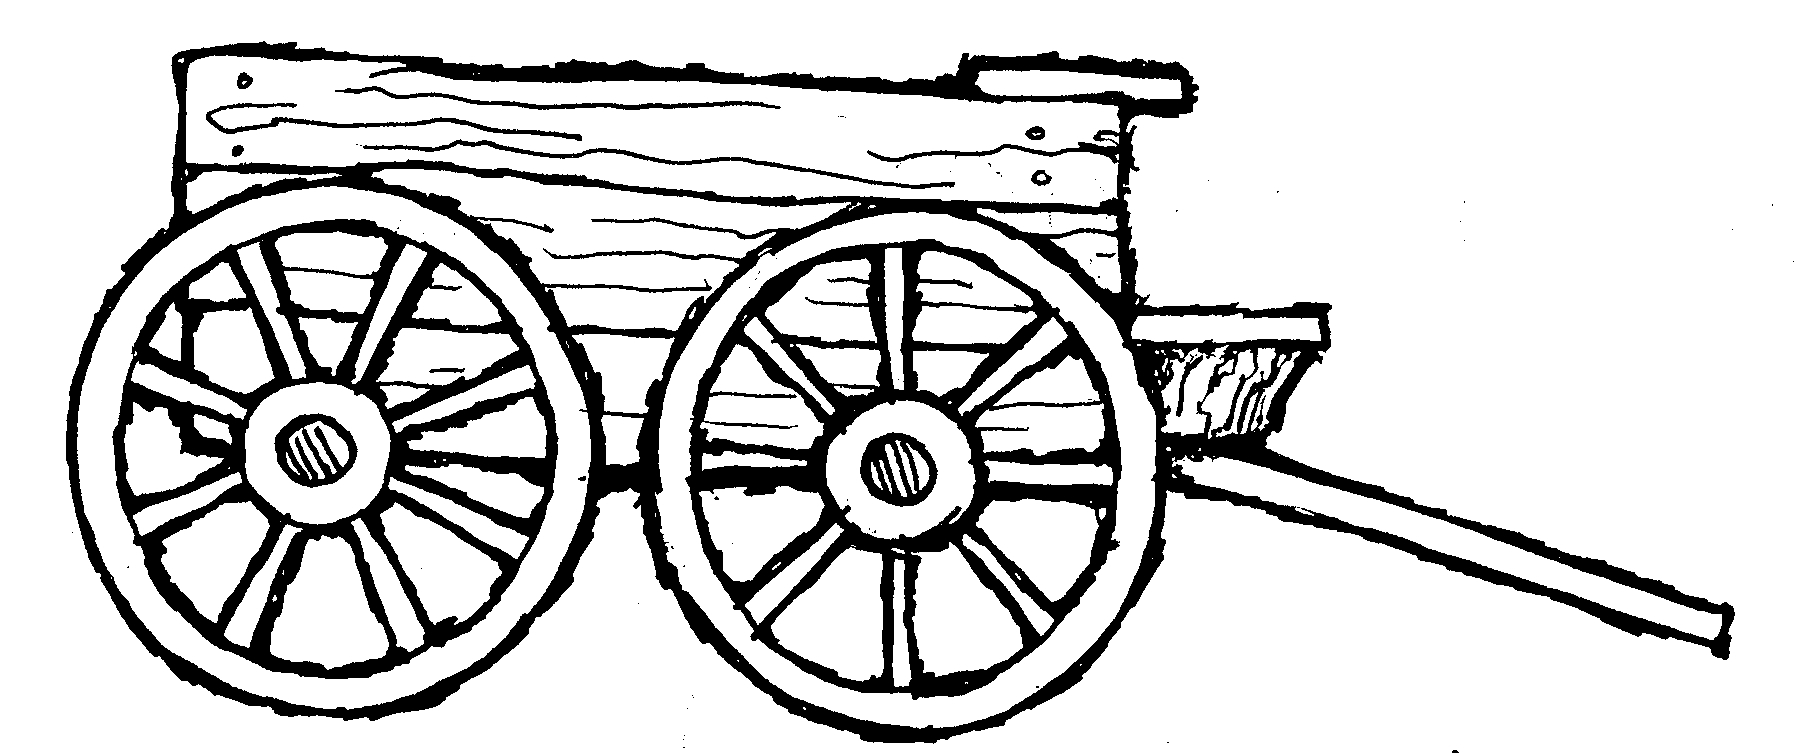 Free Wagon Clipart Black And White, Download Free Wagon Clipart Black